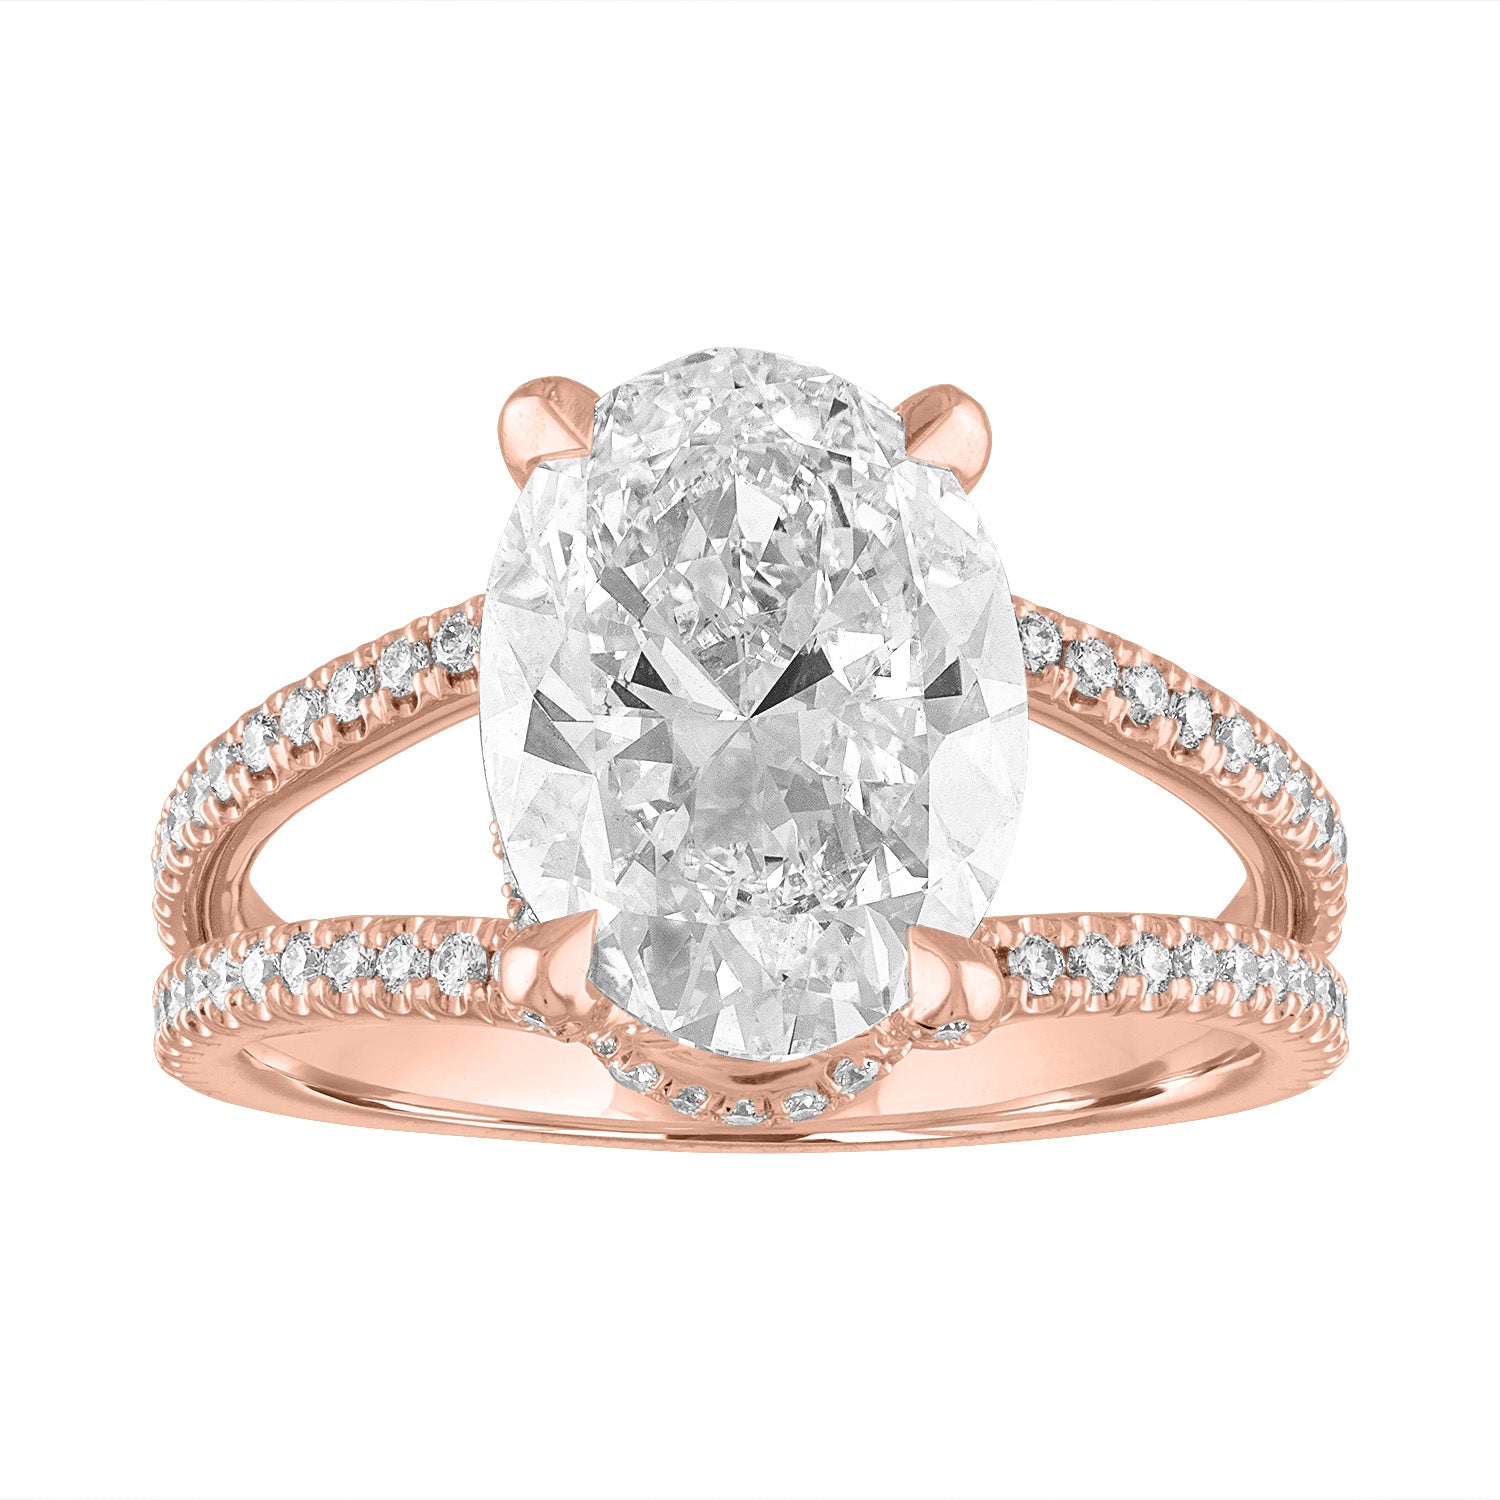 Oval Pave Split Shank Engagement Ring in Rose Gold